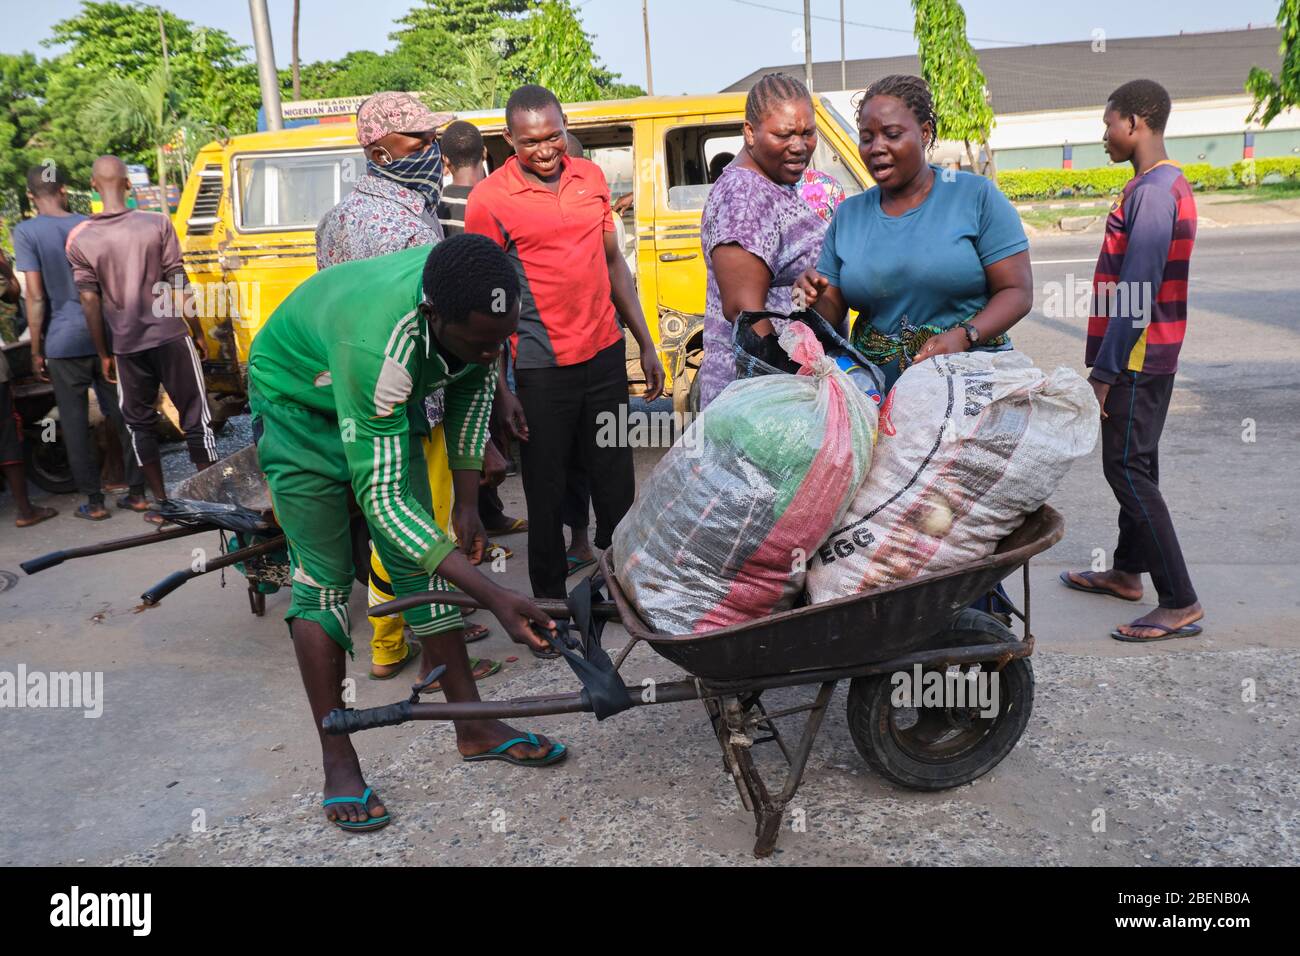 A wheelbarrow pusher loads bags of goods into his wheelbarrow shortly after a bus dropped a few people returning from the market. Stock Photo